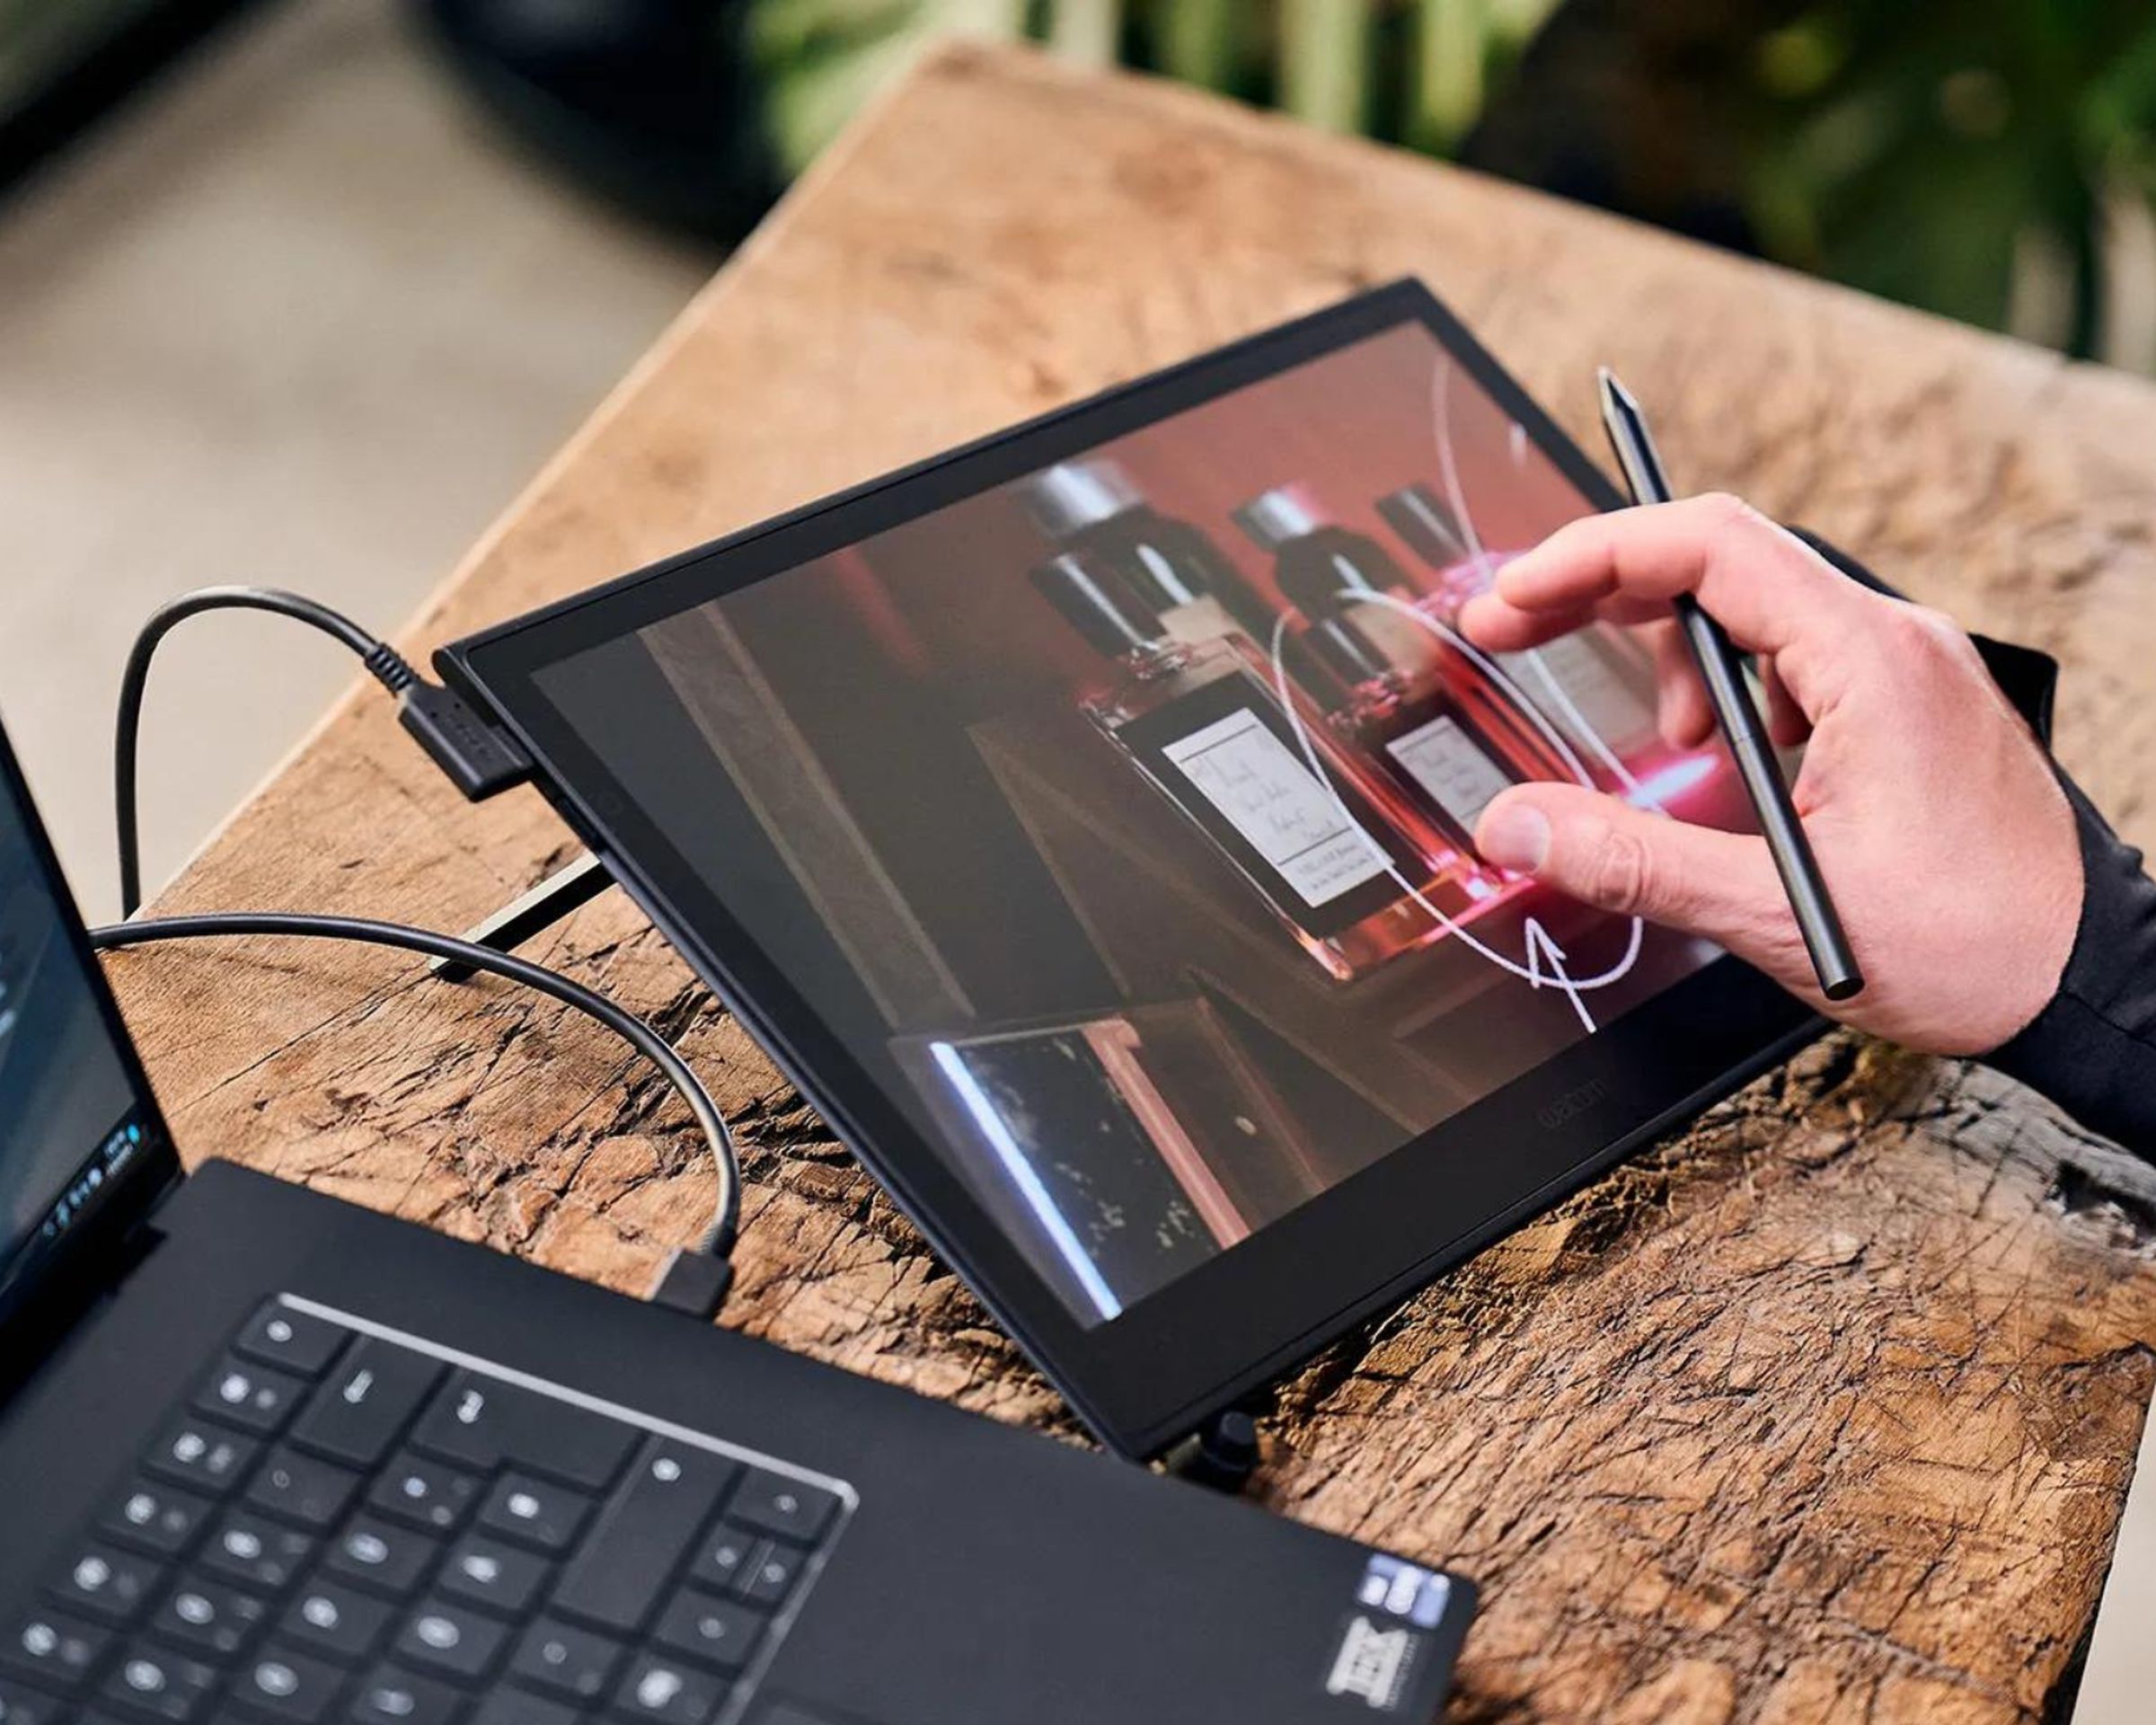 Someone using the Wacom Movink 13 display drawing tablet with a connected laptop.